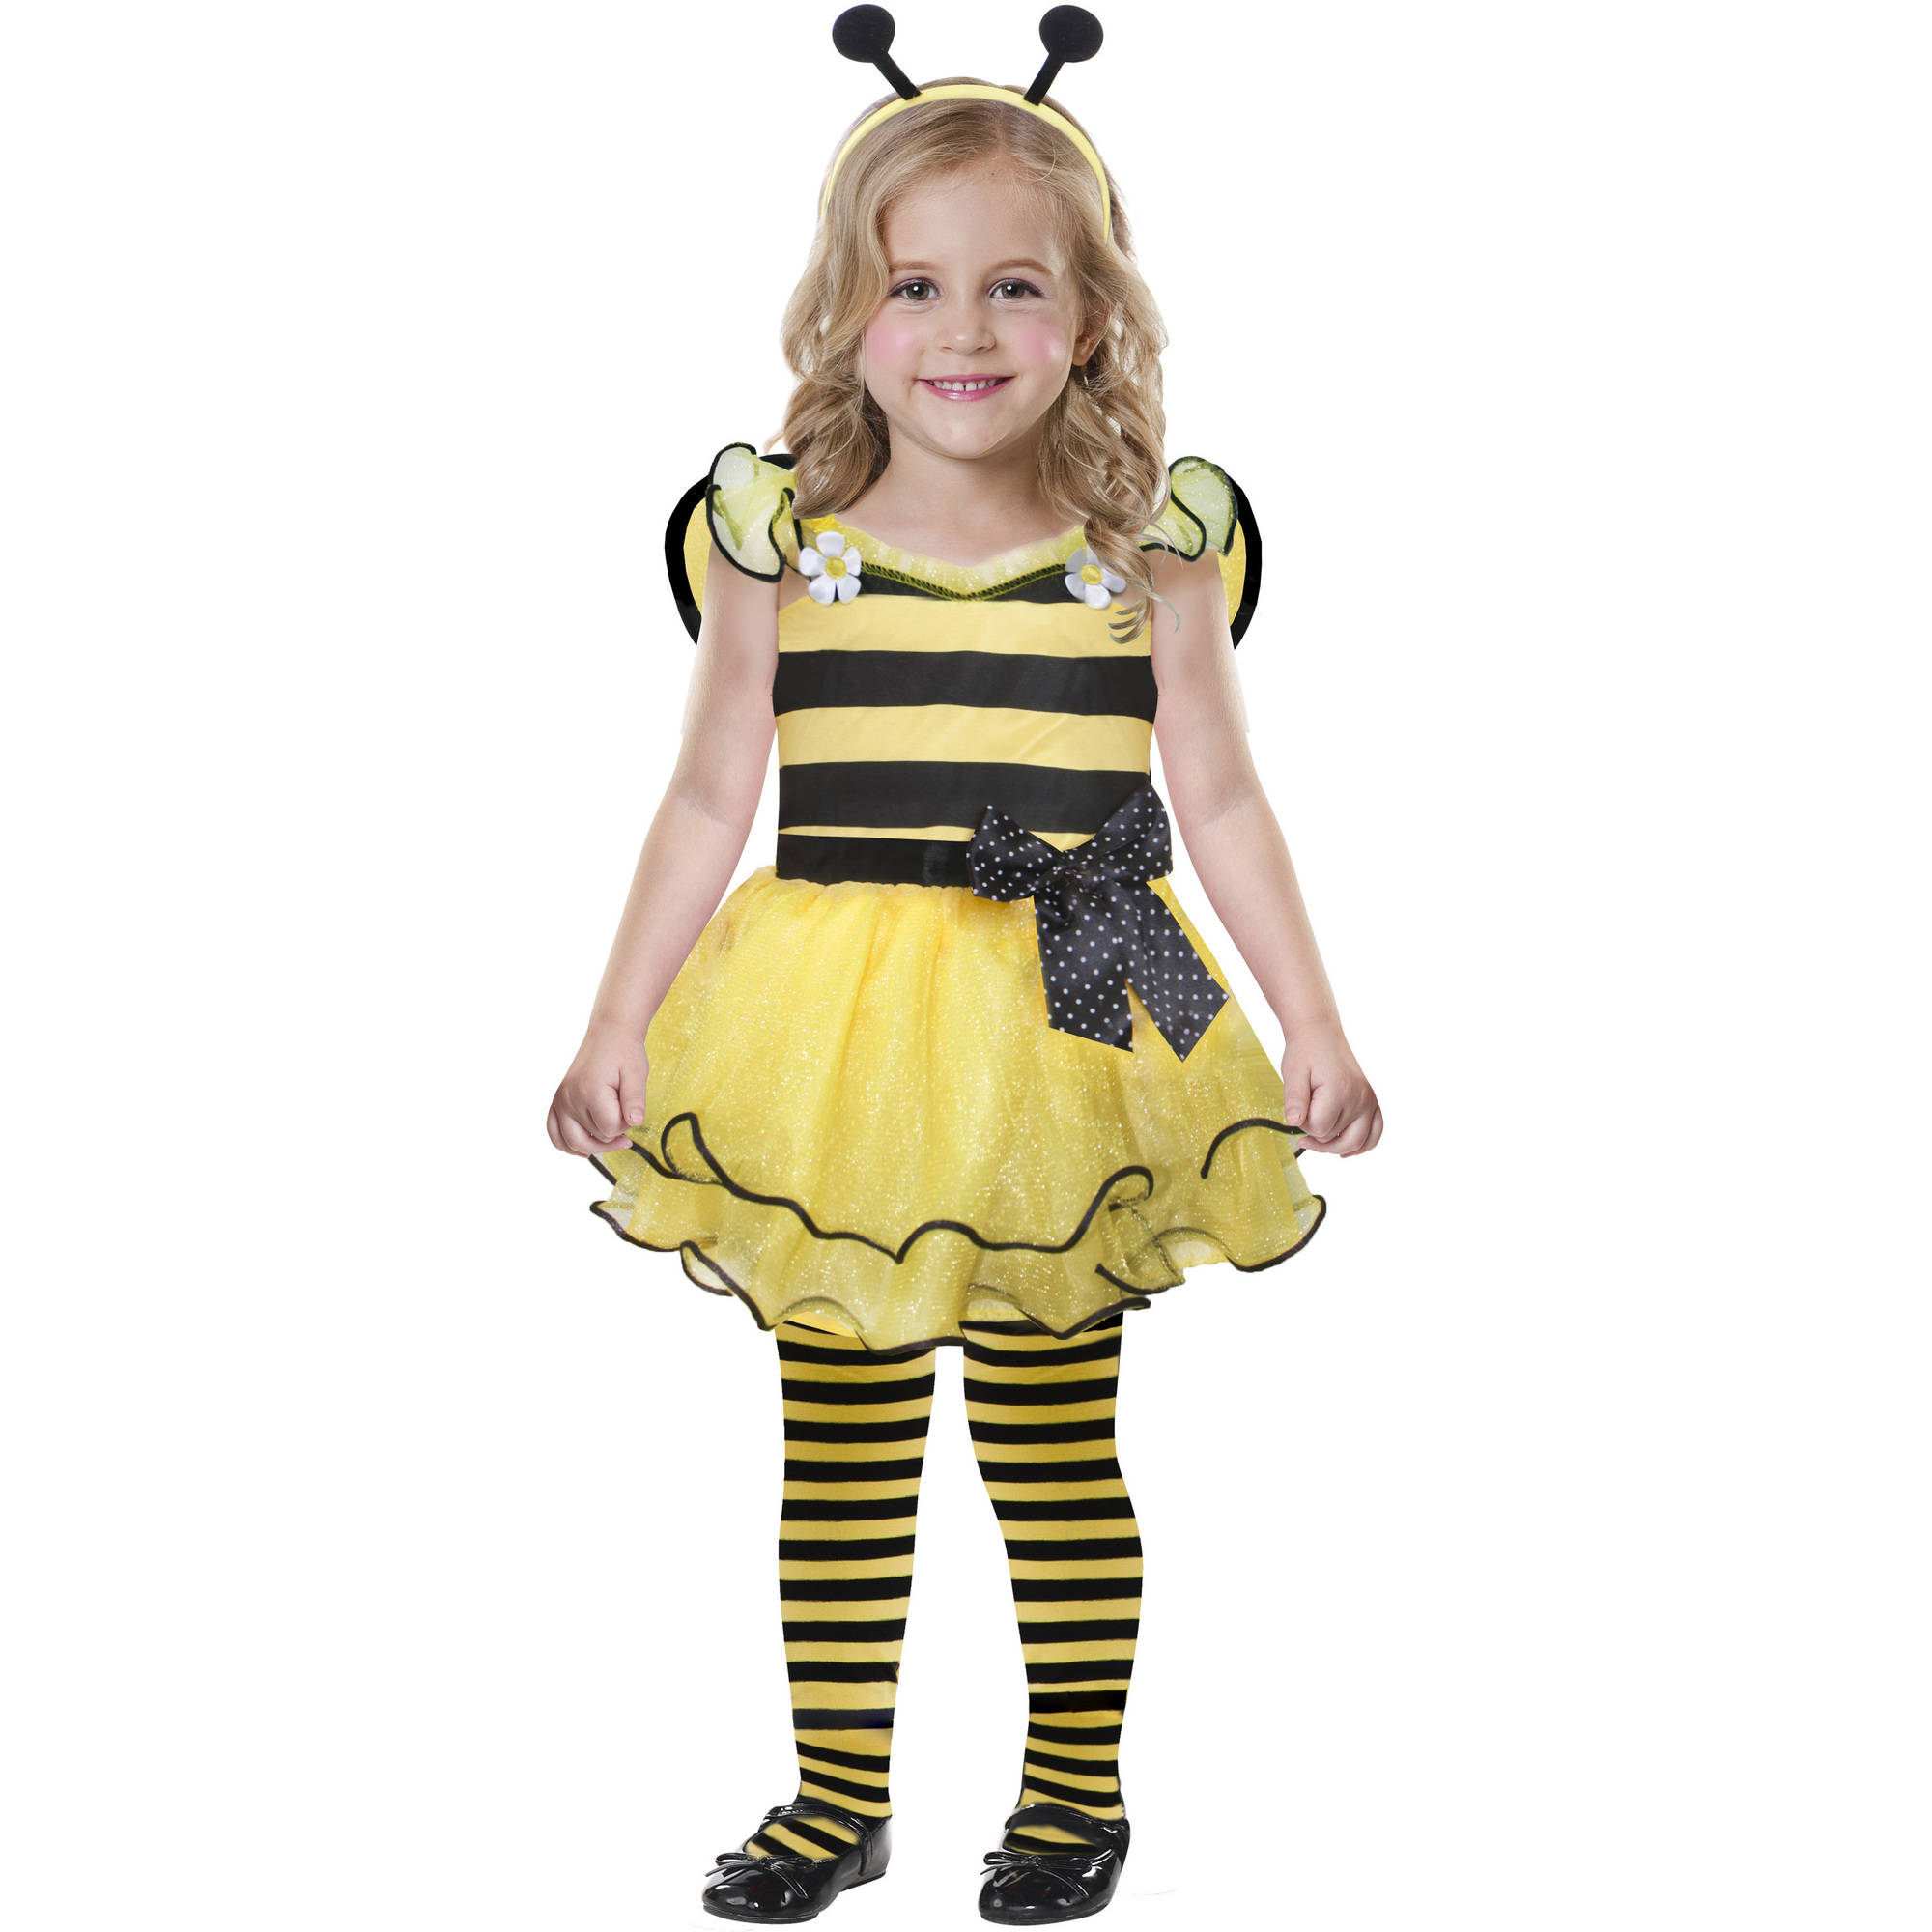 Cute As Can Bee Toddler Halloween Costume - image 1 of 1